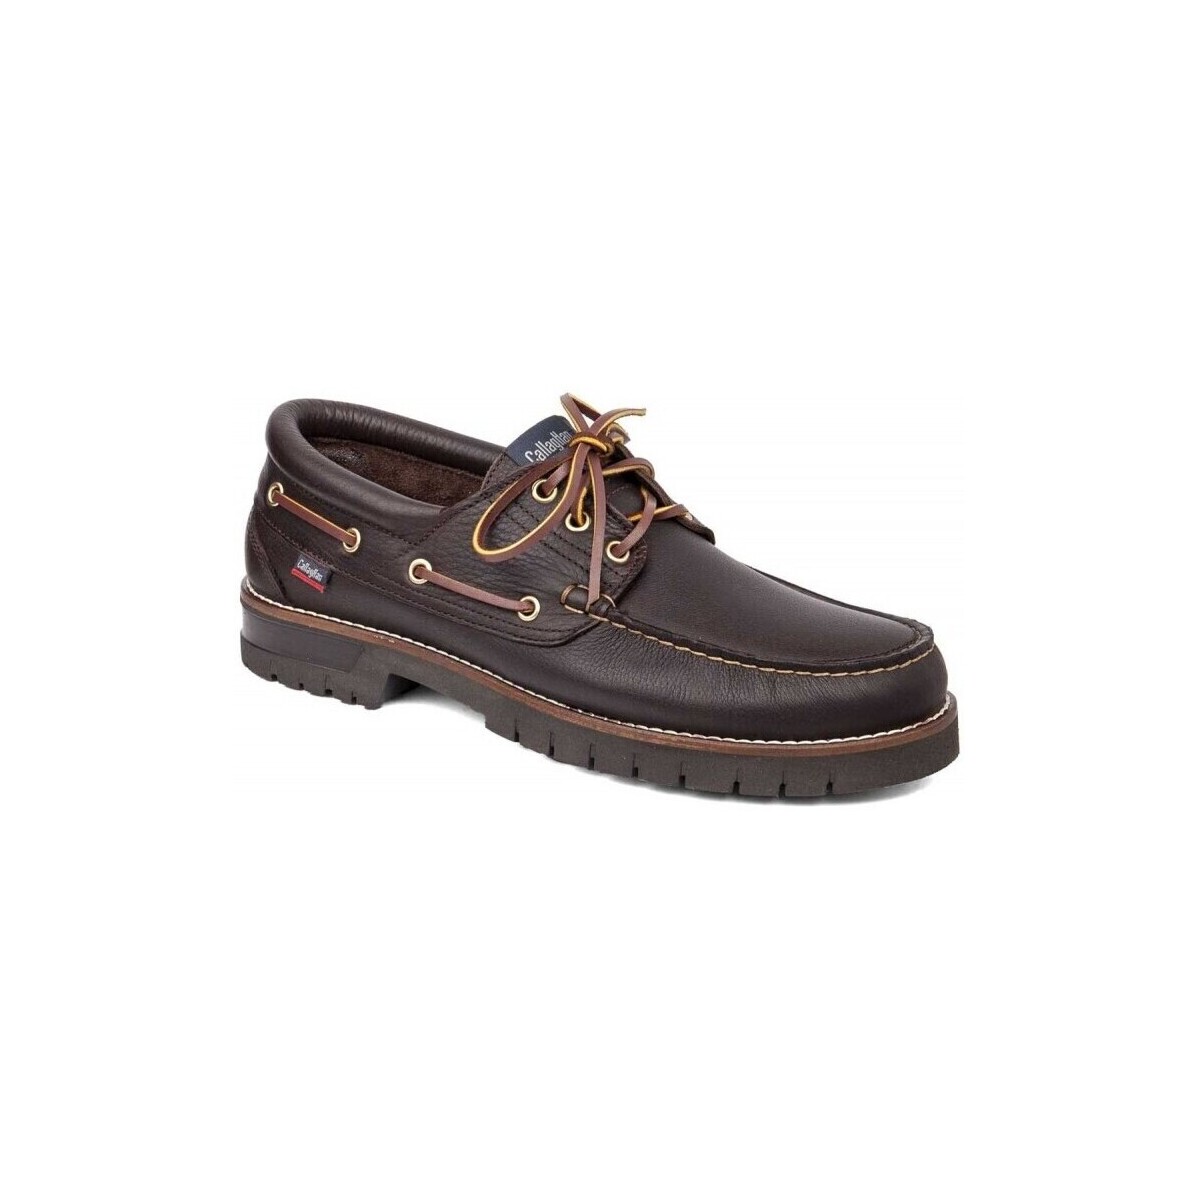 Boat shoes CallagHan 24927-24